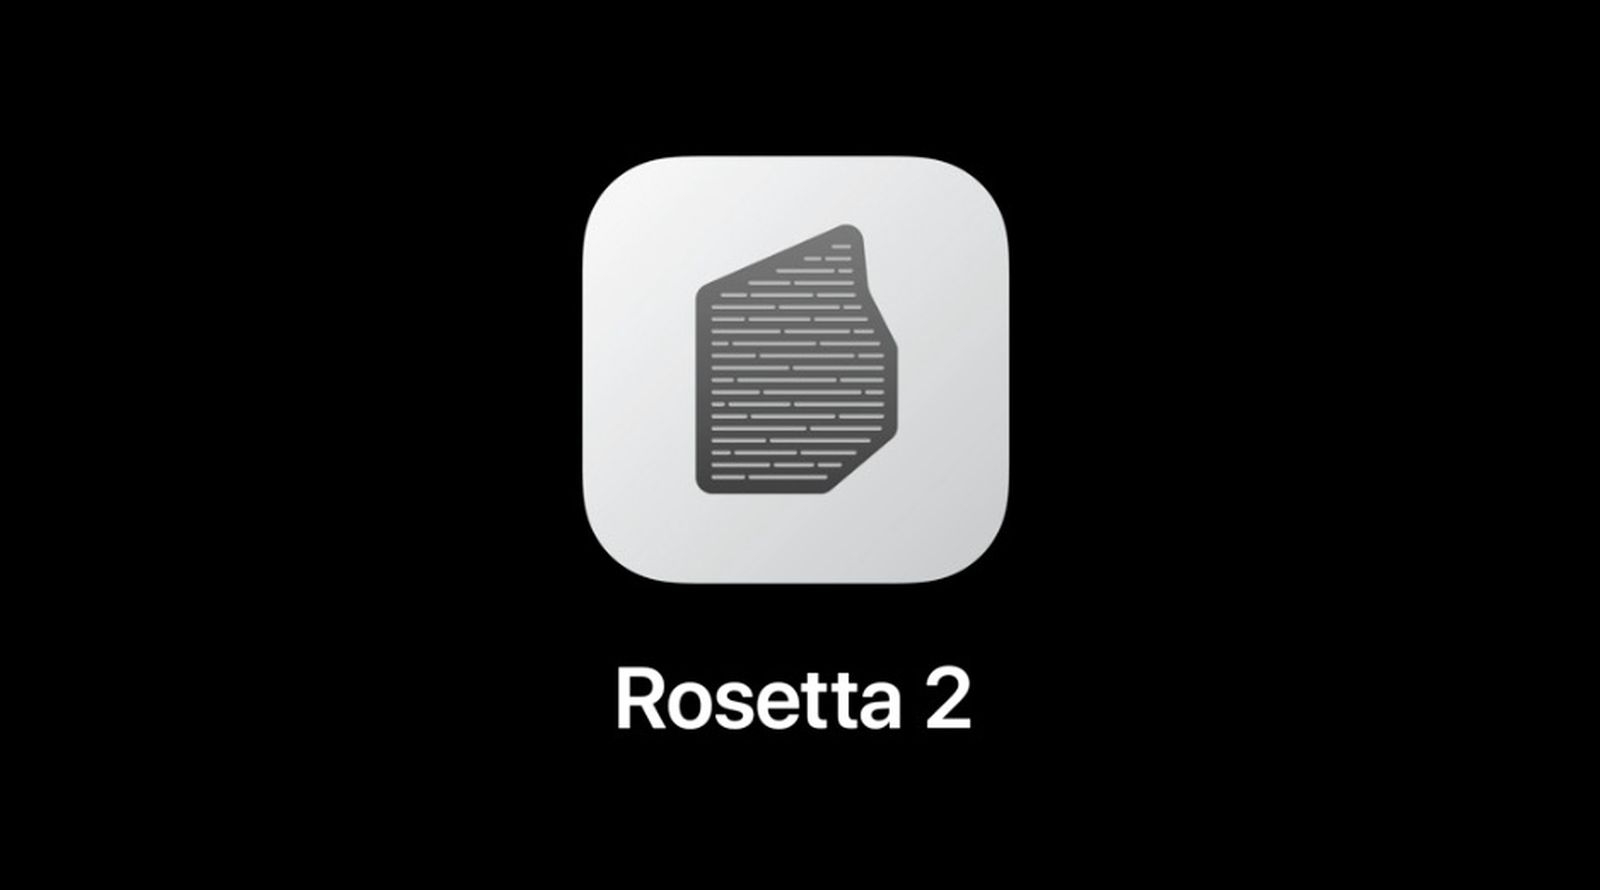 Rosetta can be removed from Macs M1 in some regions on macOS 11.3